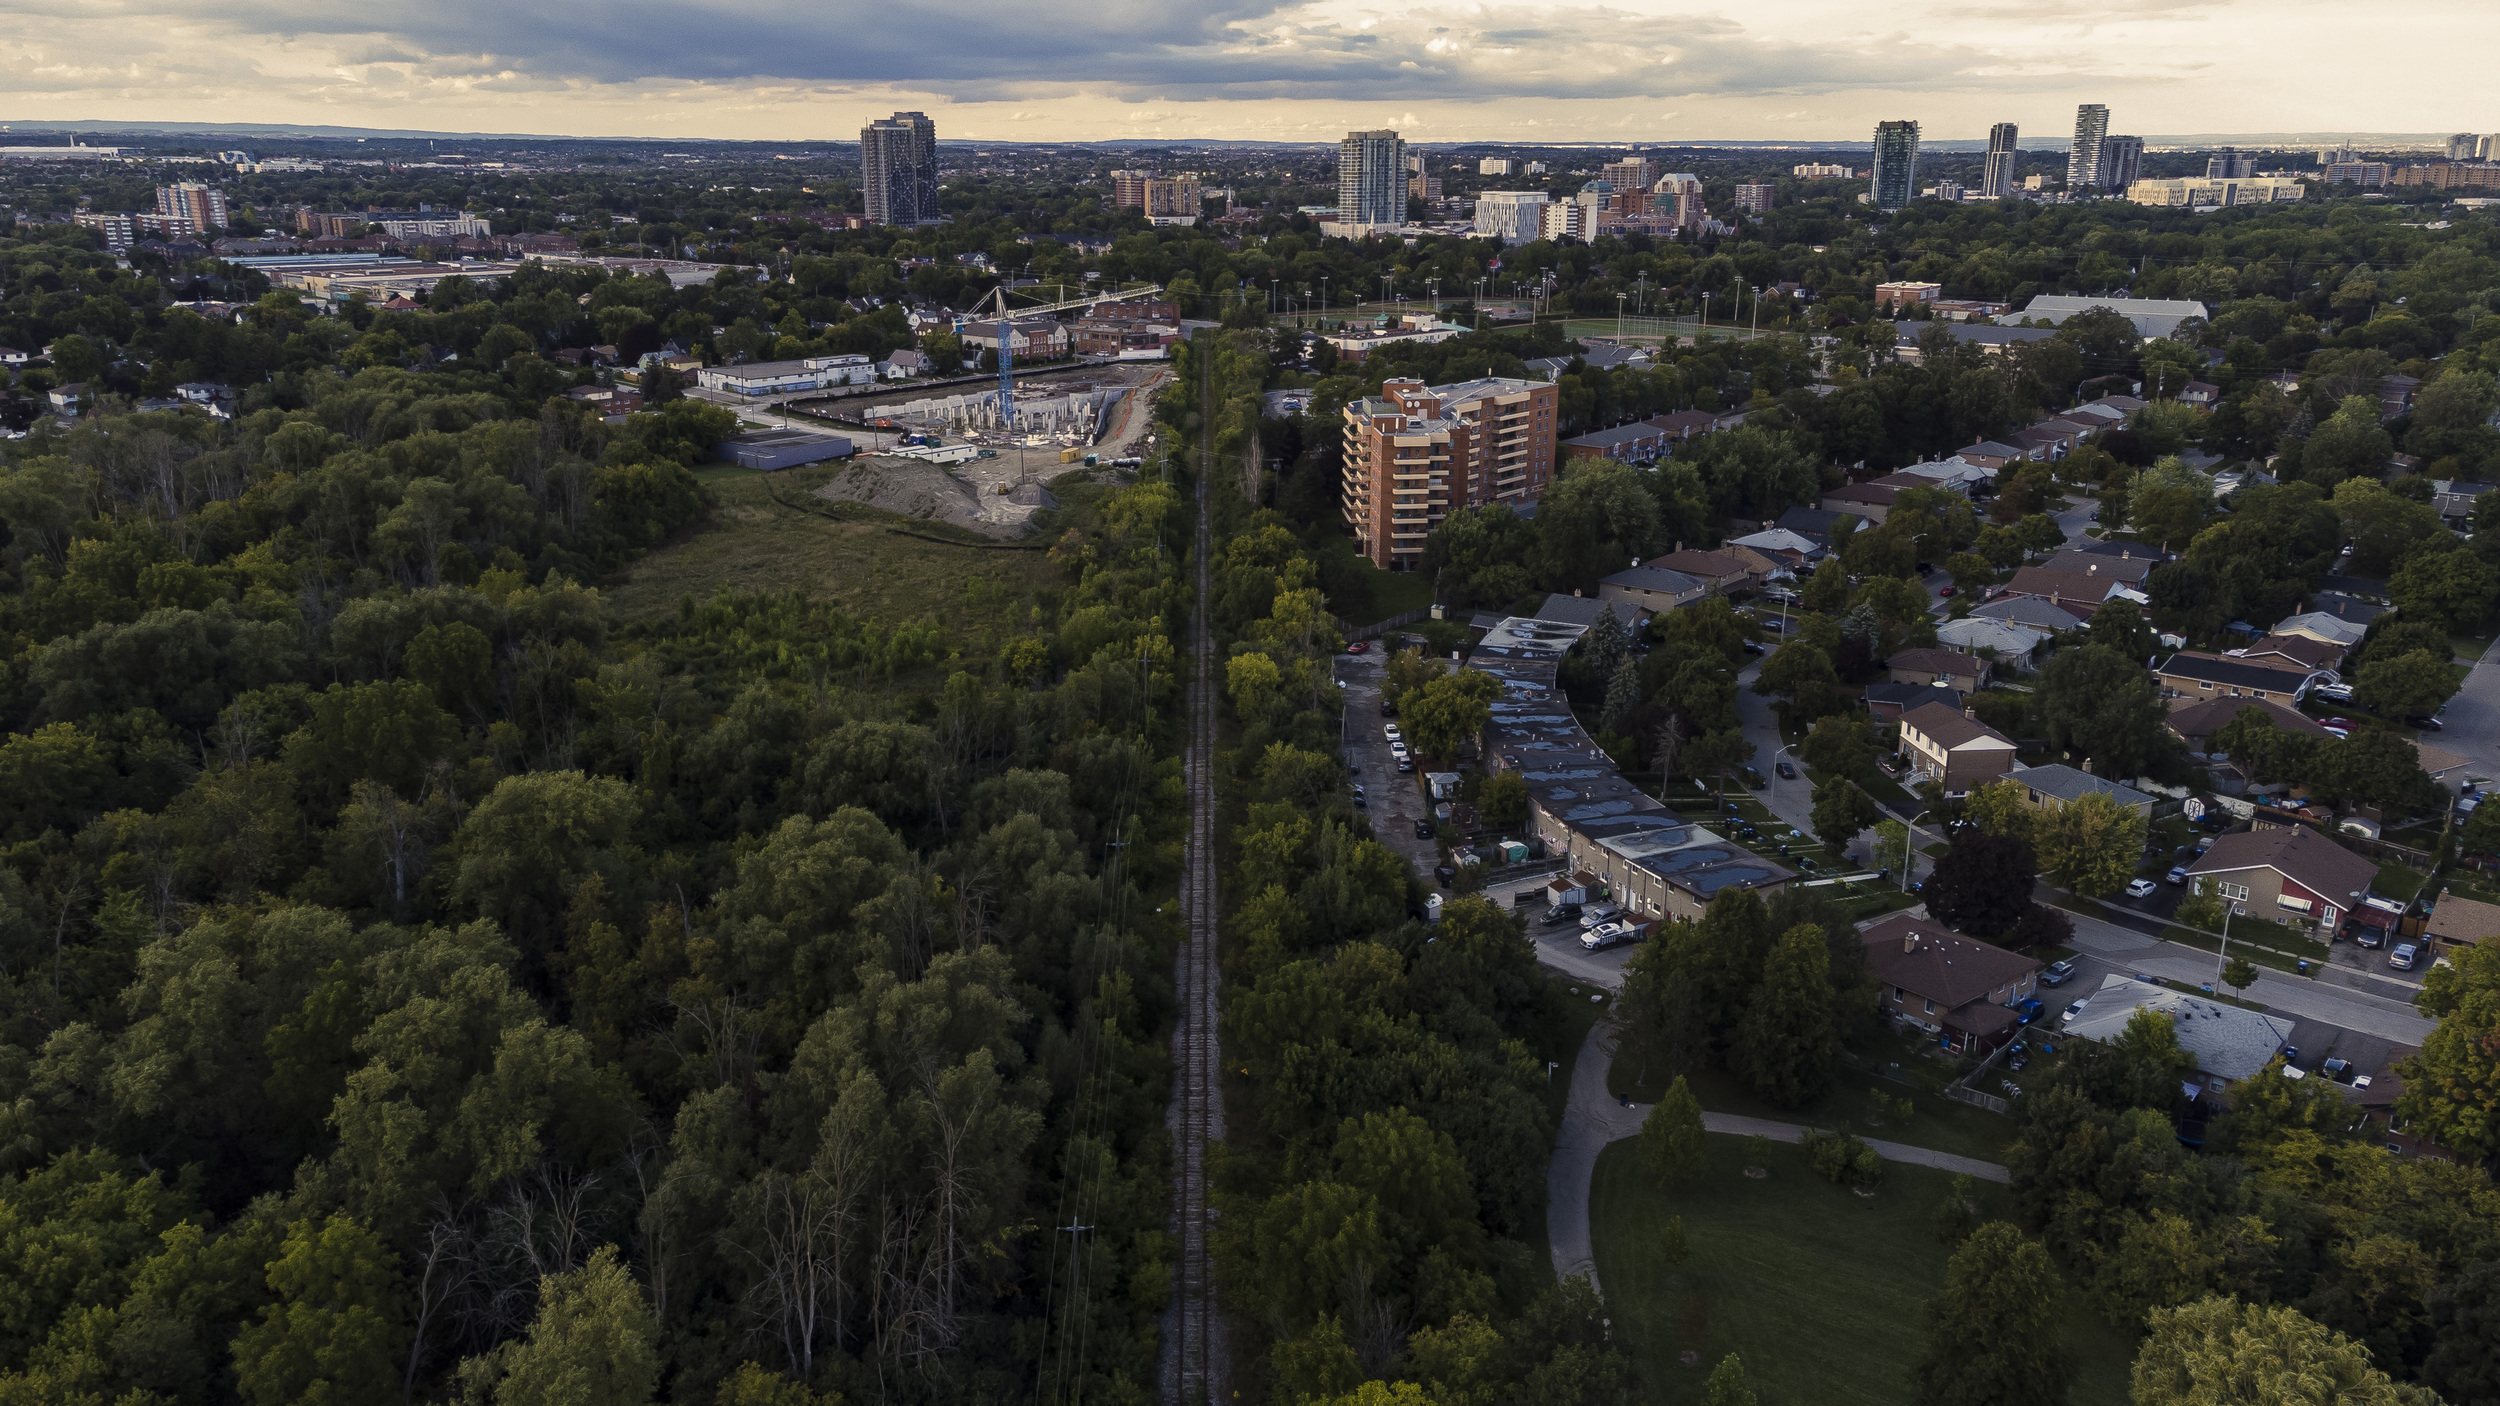 An overview of the old railroad tracks through Brampton's core, where the Peel Region Rail Trail would be created.